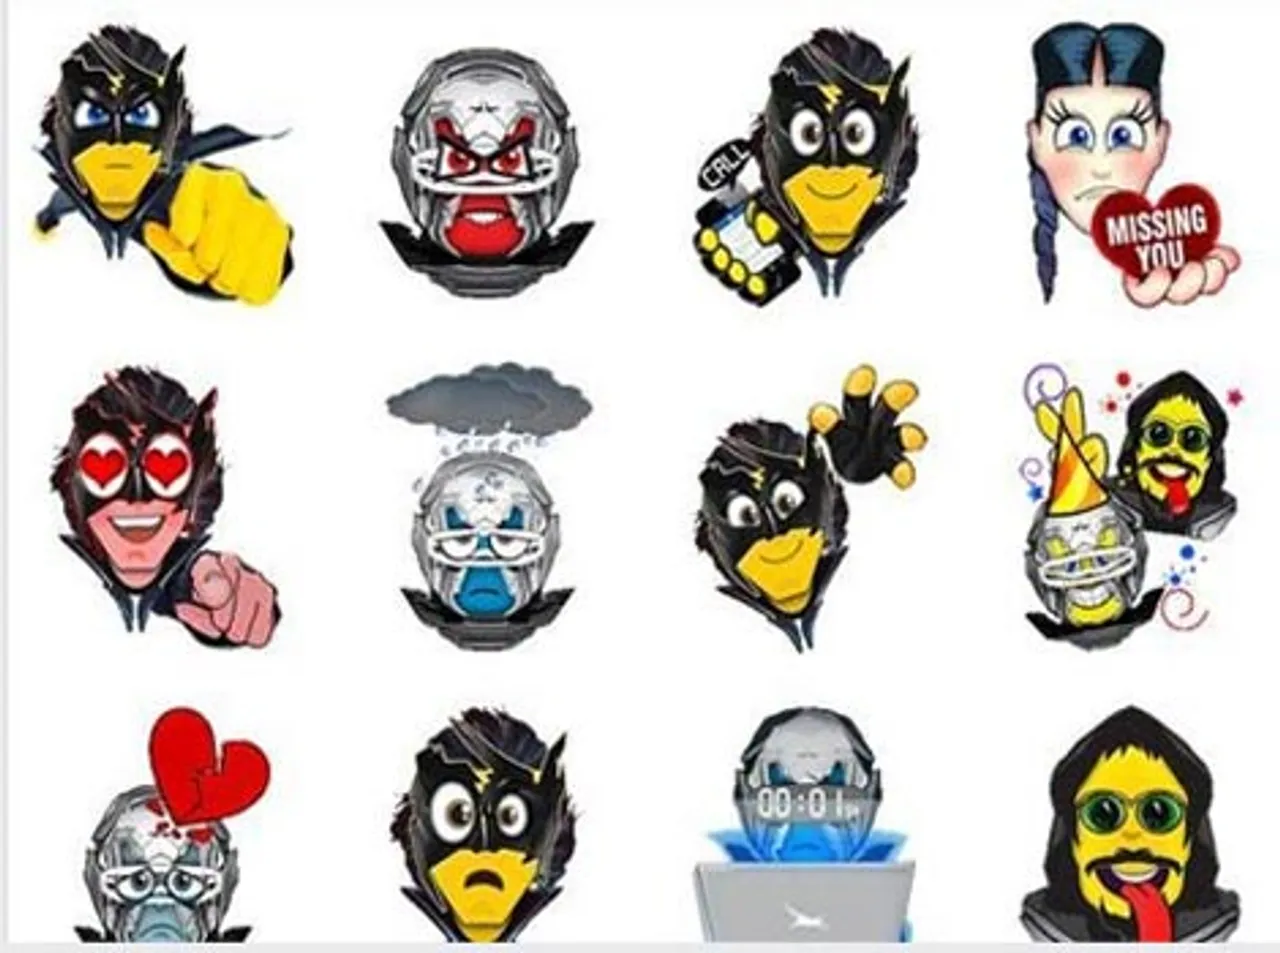 Social Media Campaign Review: Krrish 3 Targets Facebook Users via Stickers for Chat